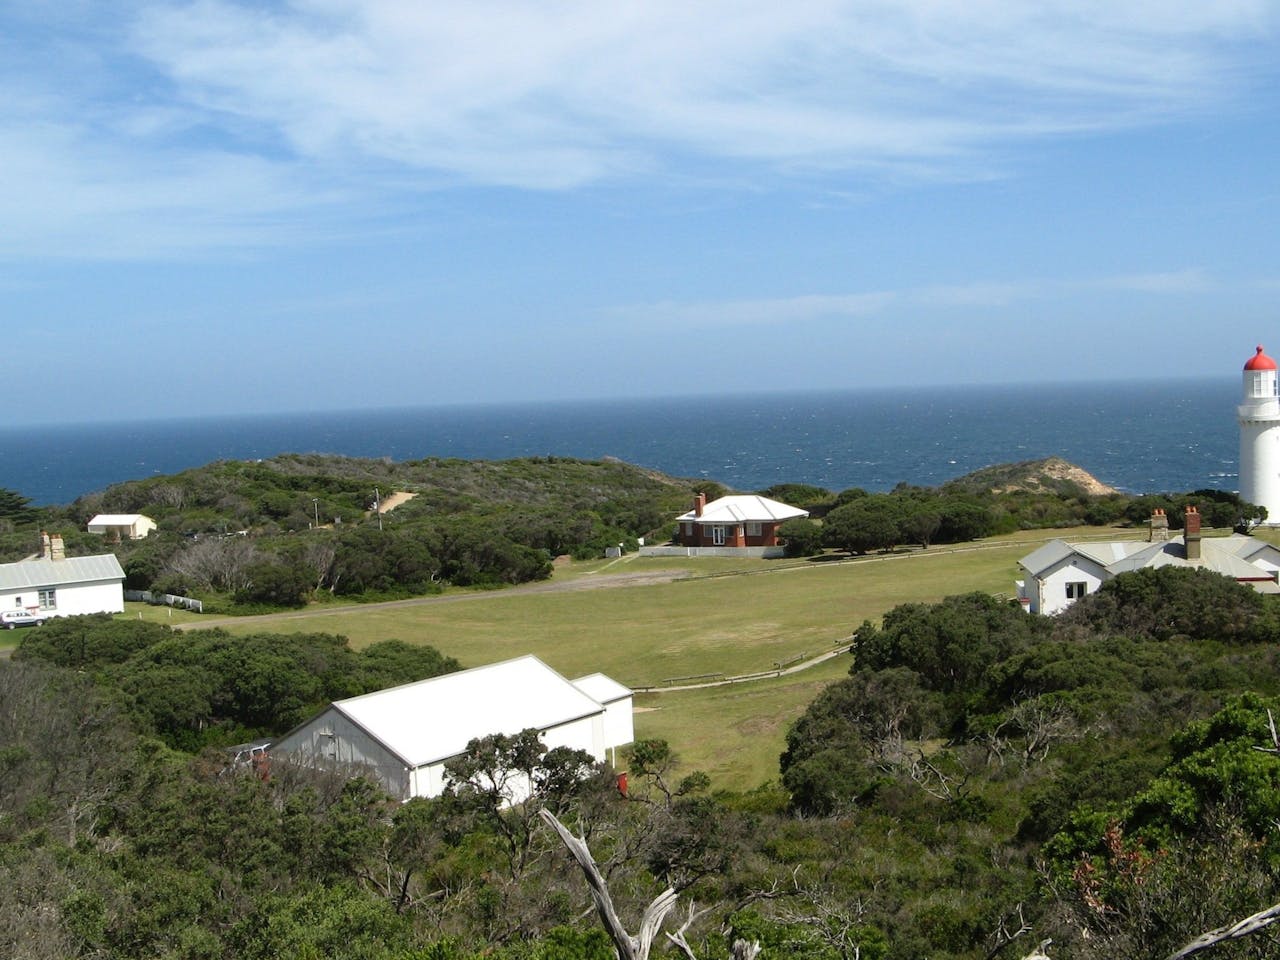 cape schanck lighthouse on far right of image